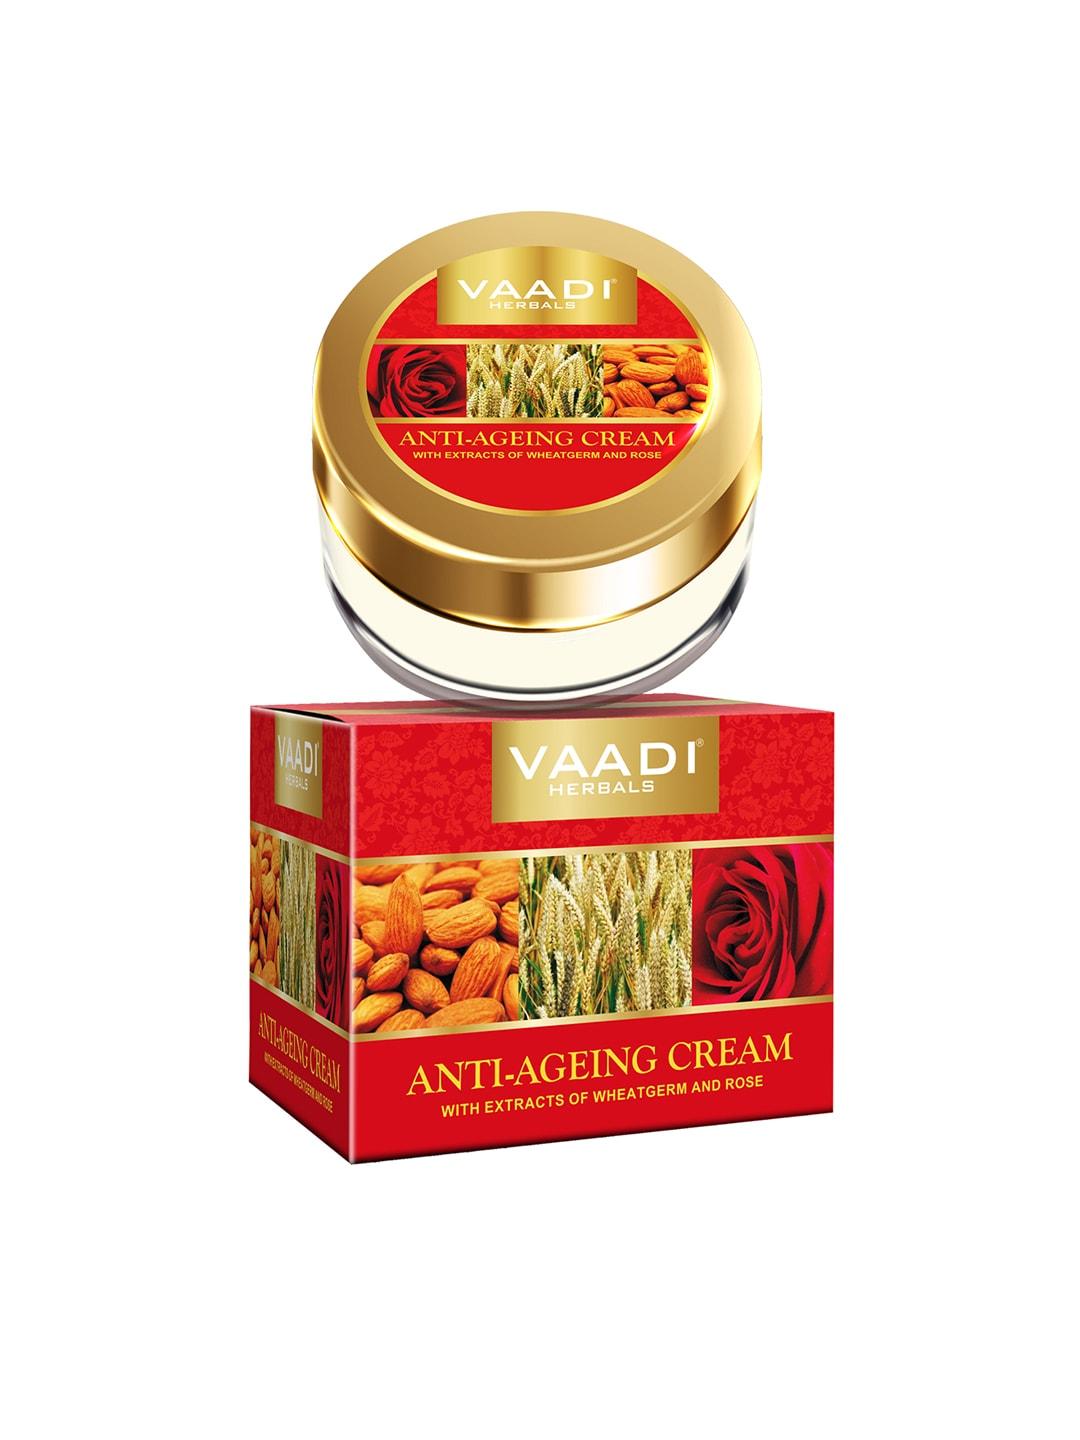 Vaadi Herbals Anti-Ageing Cream with Almond, Wheatgerm Oil & Rose Extracts - 30g